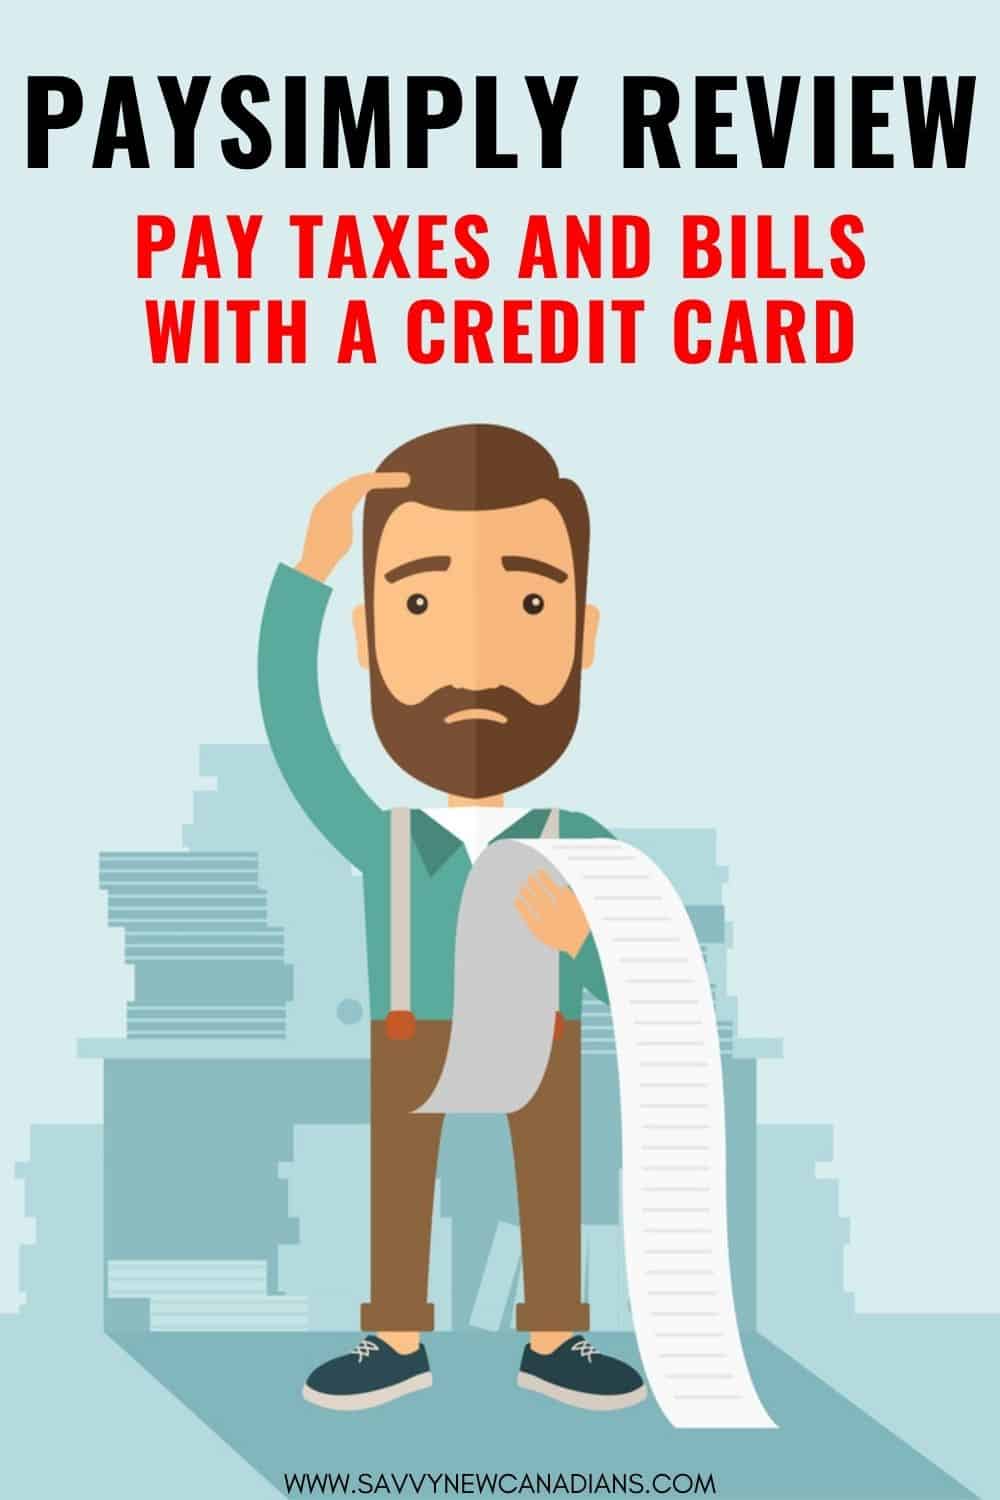 PaySimply Review: Pay Taxes and Bills with a Credit Card